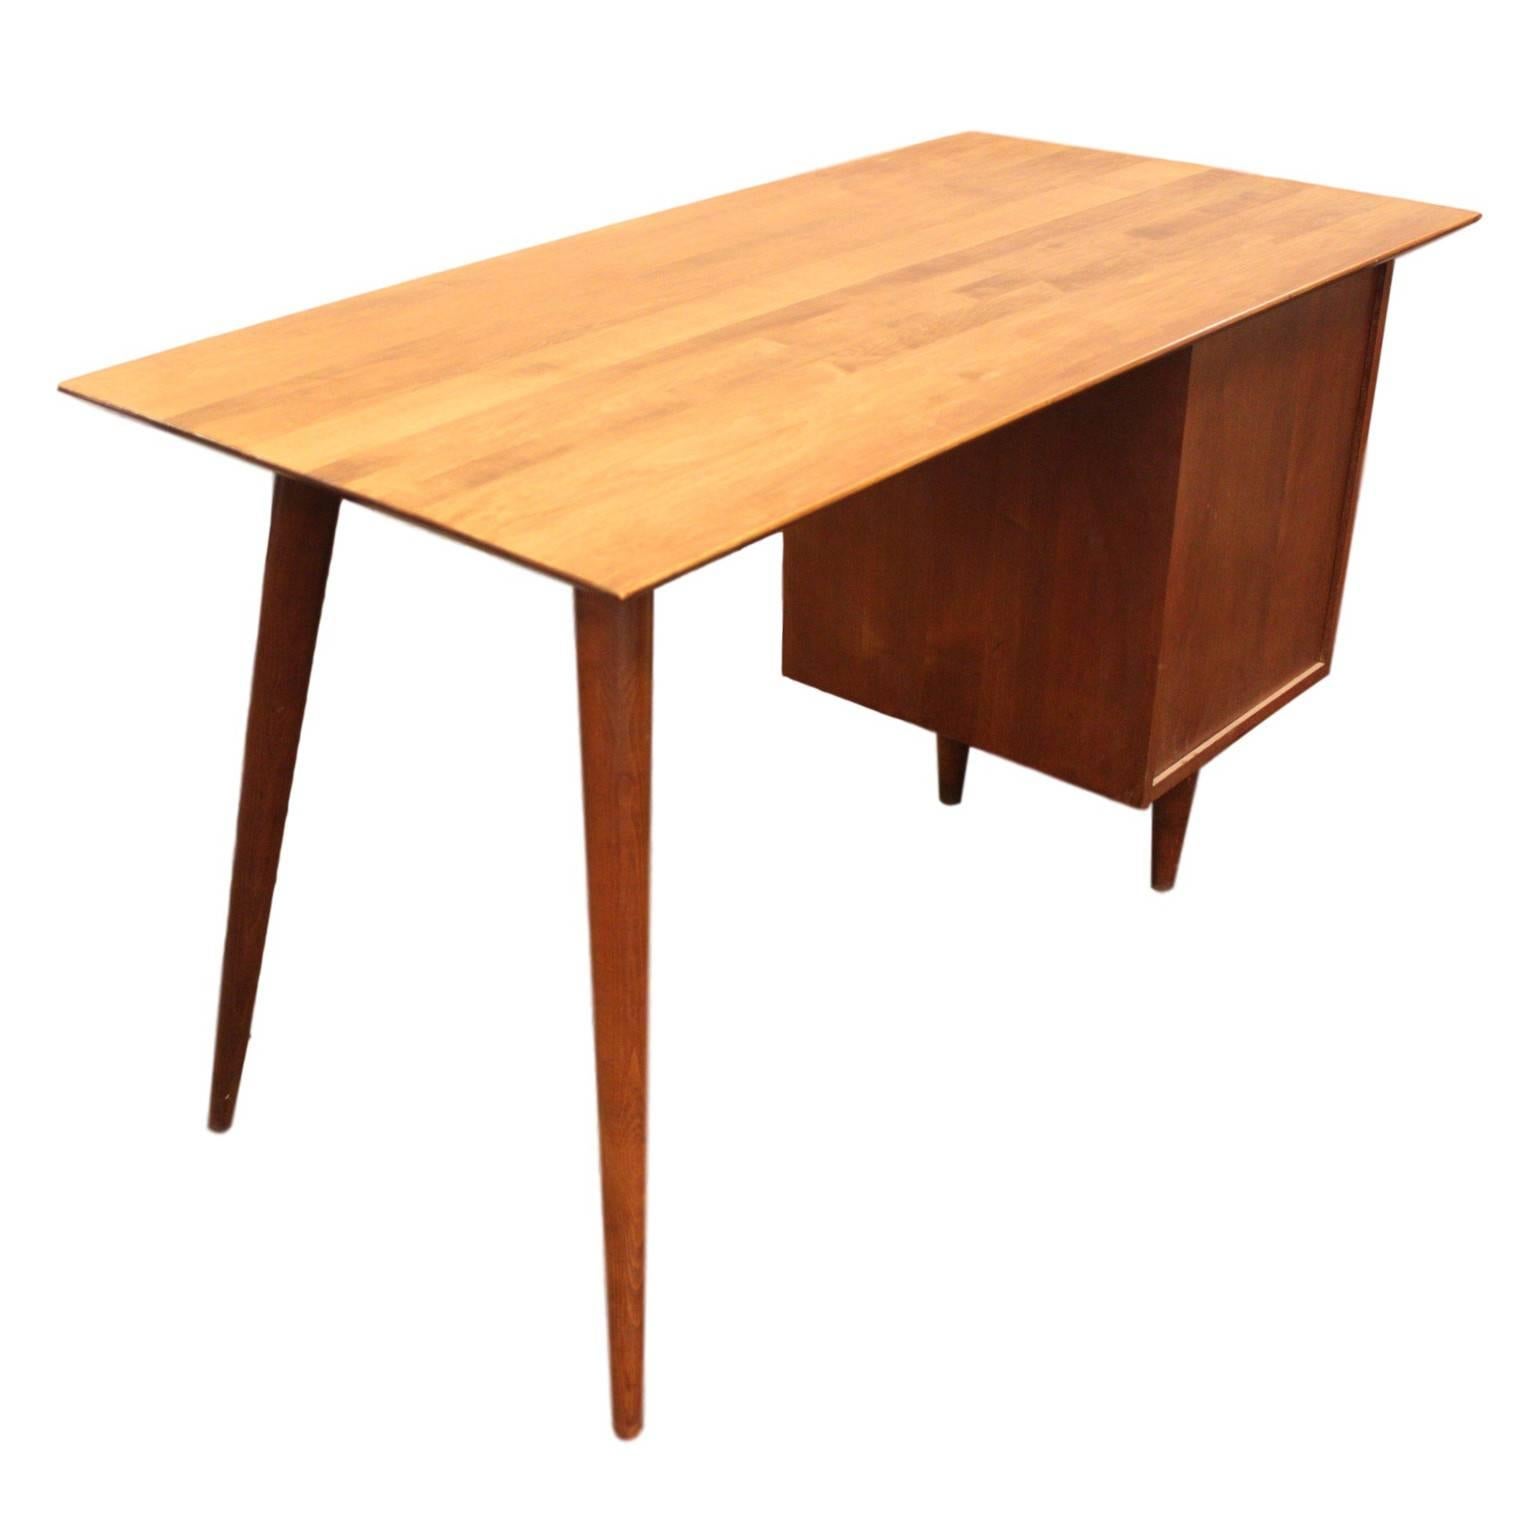 This fantastic little desk is an original 1950s piece designed by the renowned Paul McCobb for the Planner Group and manufactured by the Winchendon Furniture Company. Desk has lots of Mid-Century style in a compact package that can be used almost